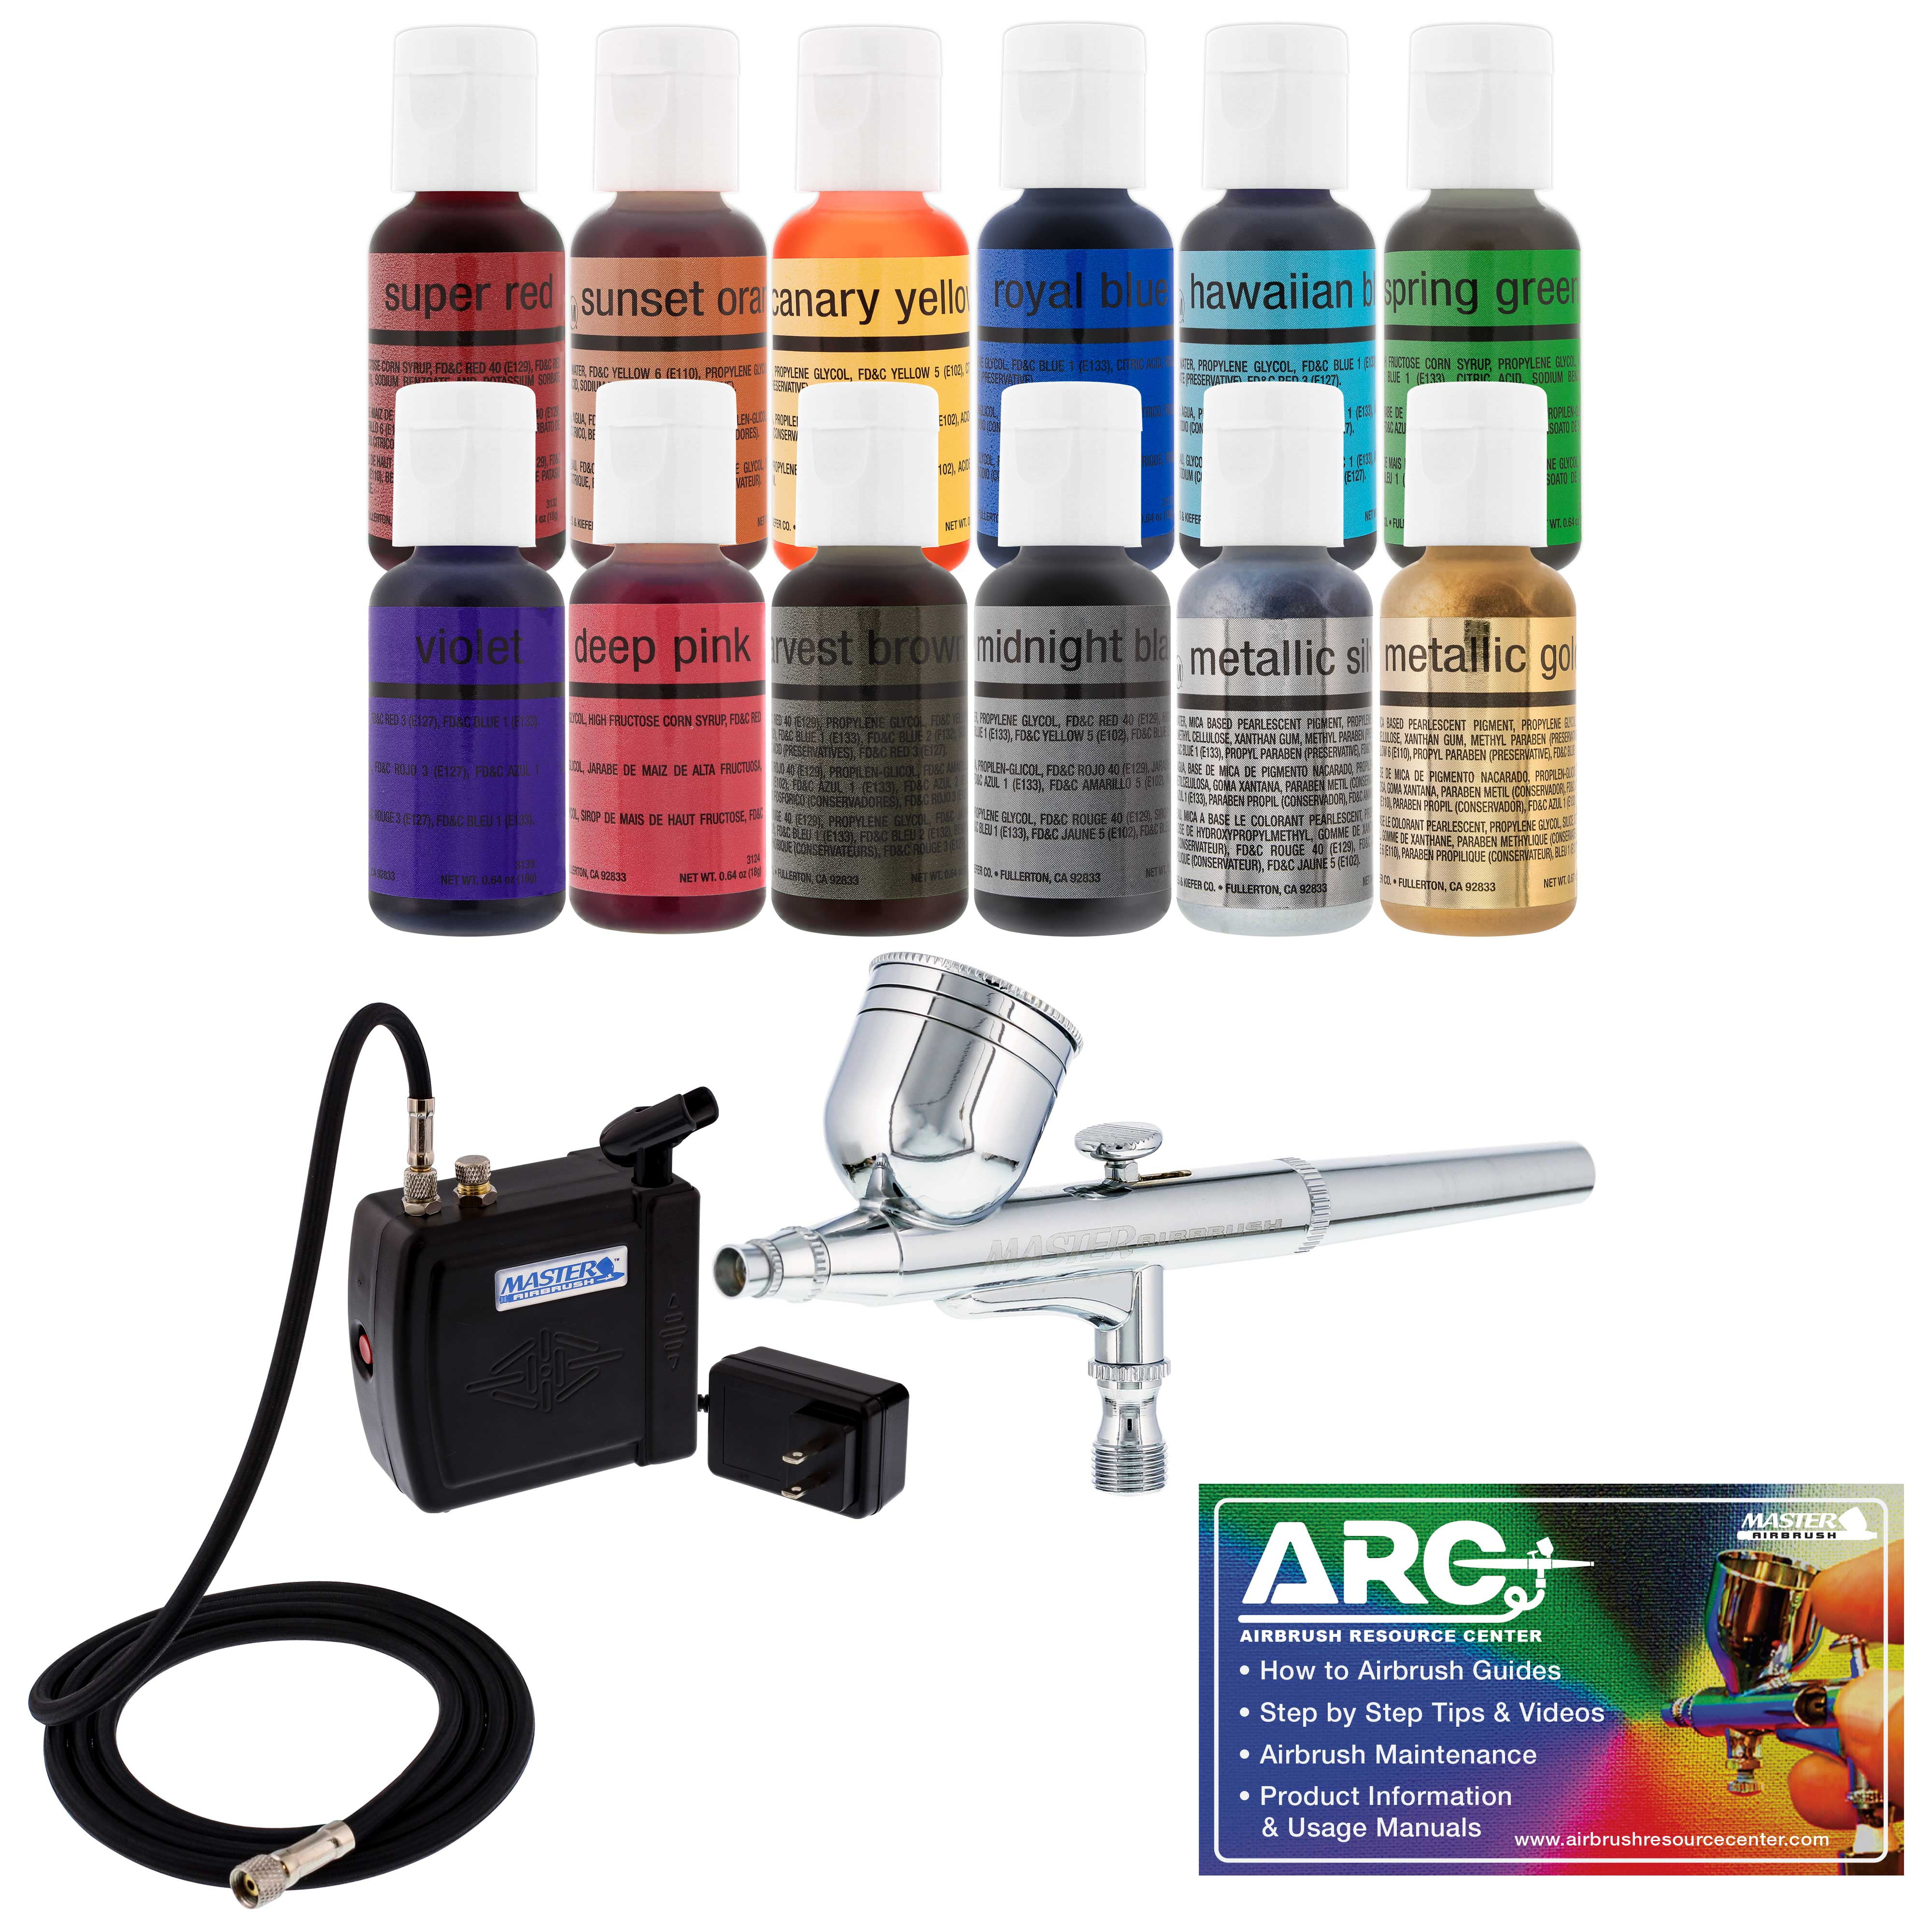 U.S. Cake Supply - Complete Cake Decorating Airbrush Kit with A Full Selection of 12 Vivid Airbrush Food Colors - Decorate Cake